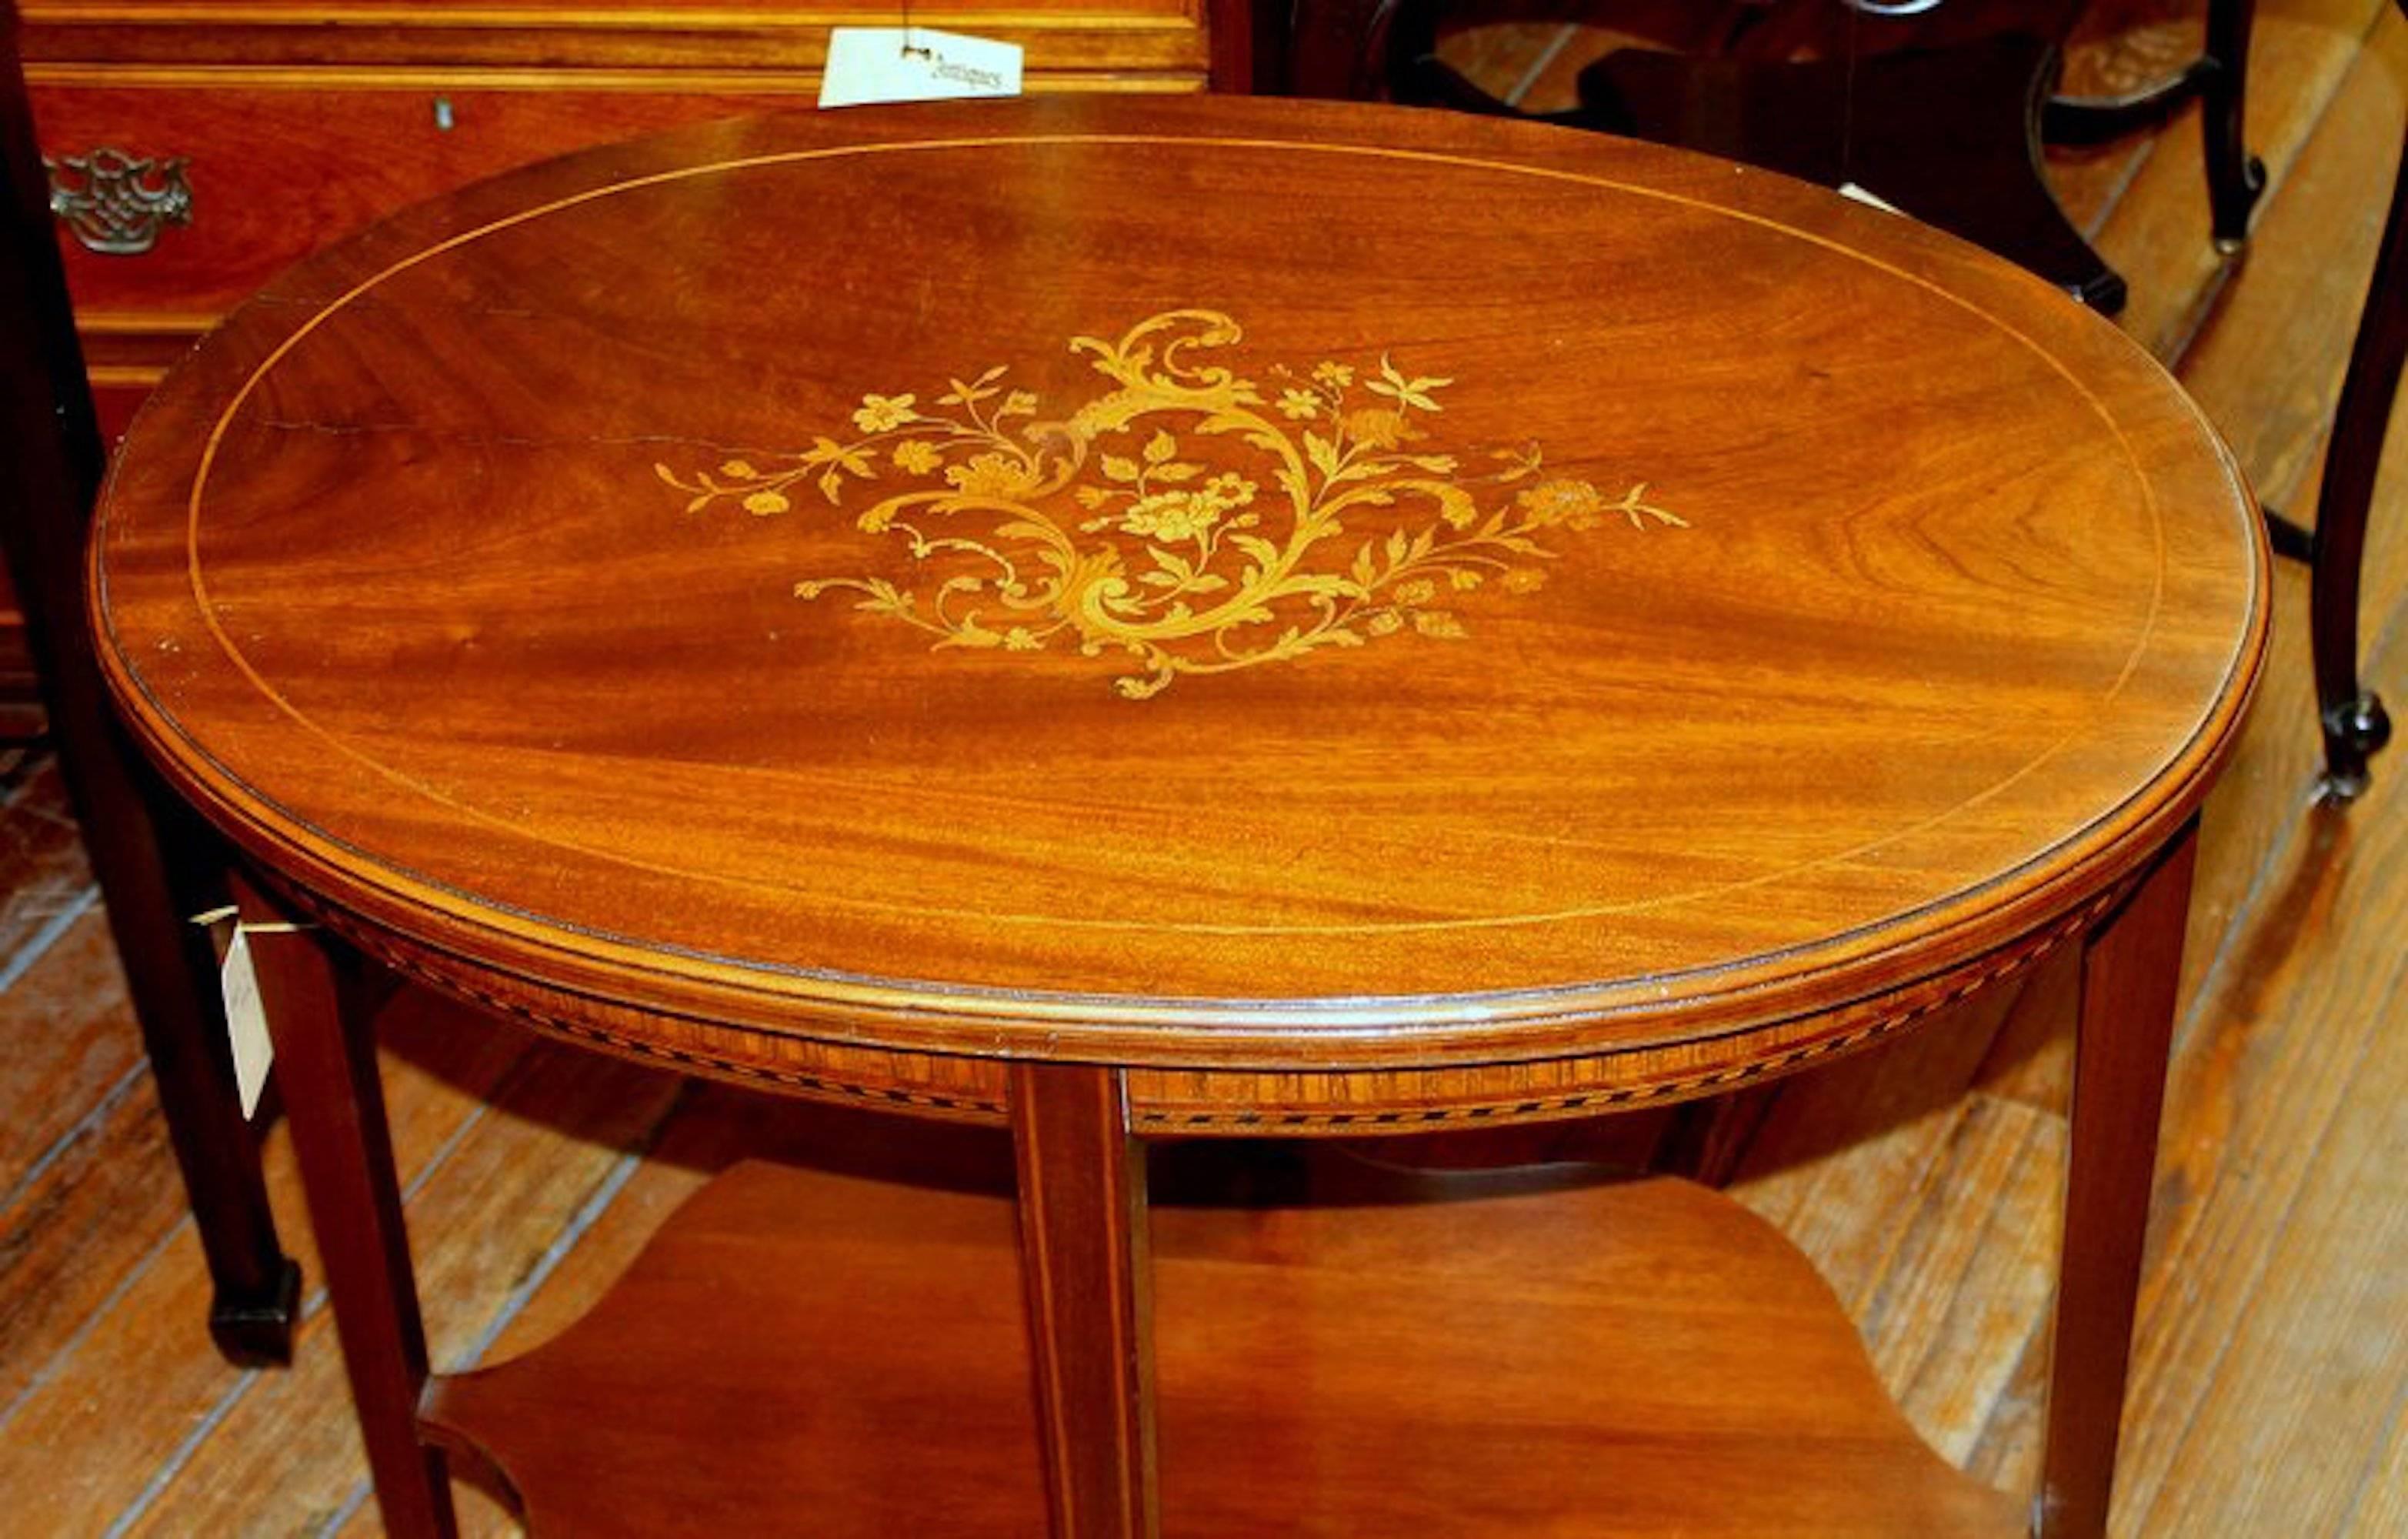 Superb old antique English marquetry inlaid mahogany oval table with delightful inlays around the apron and a handsome, shaped stretcher shelf. Pristine.
 